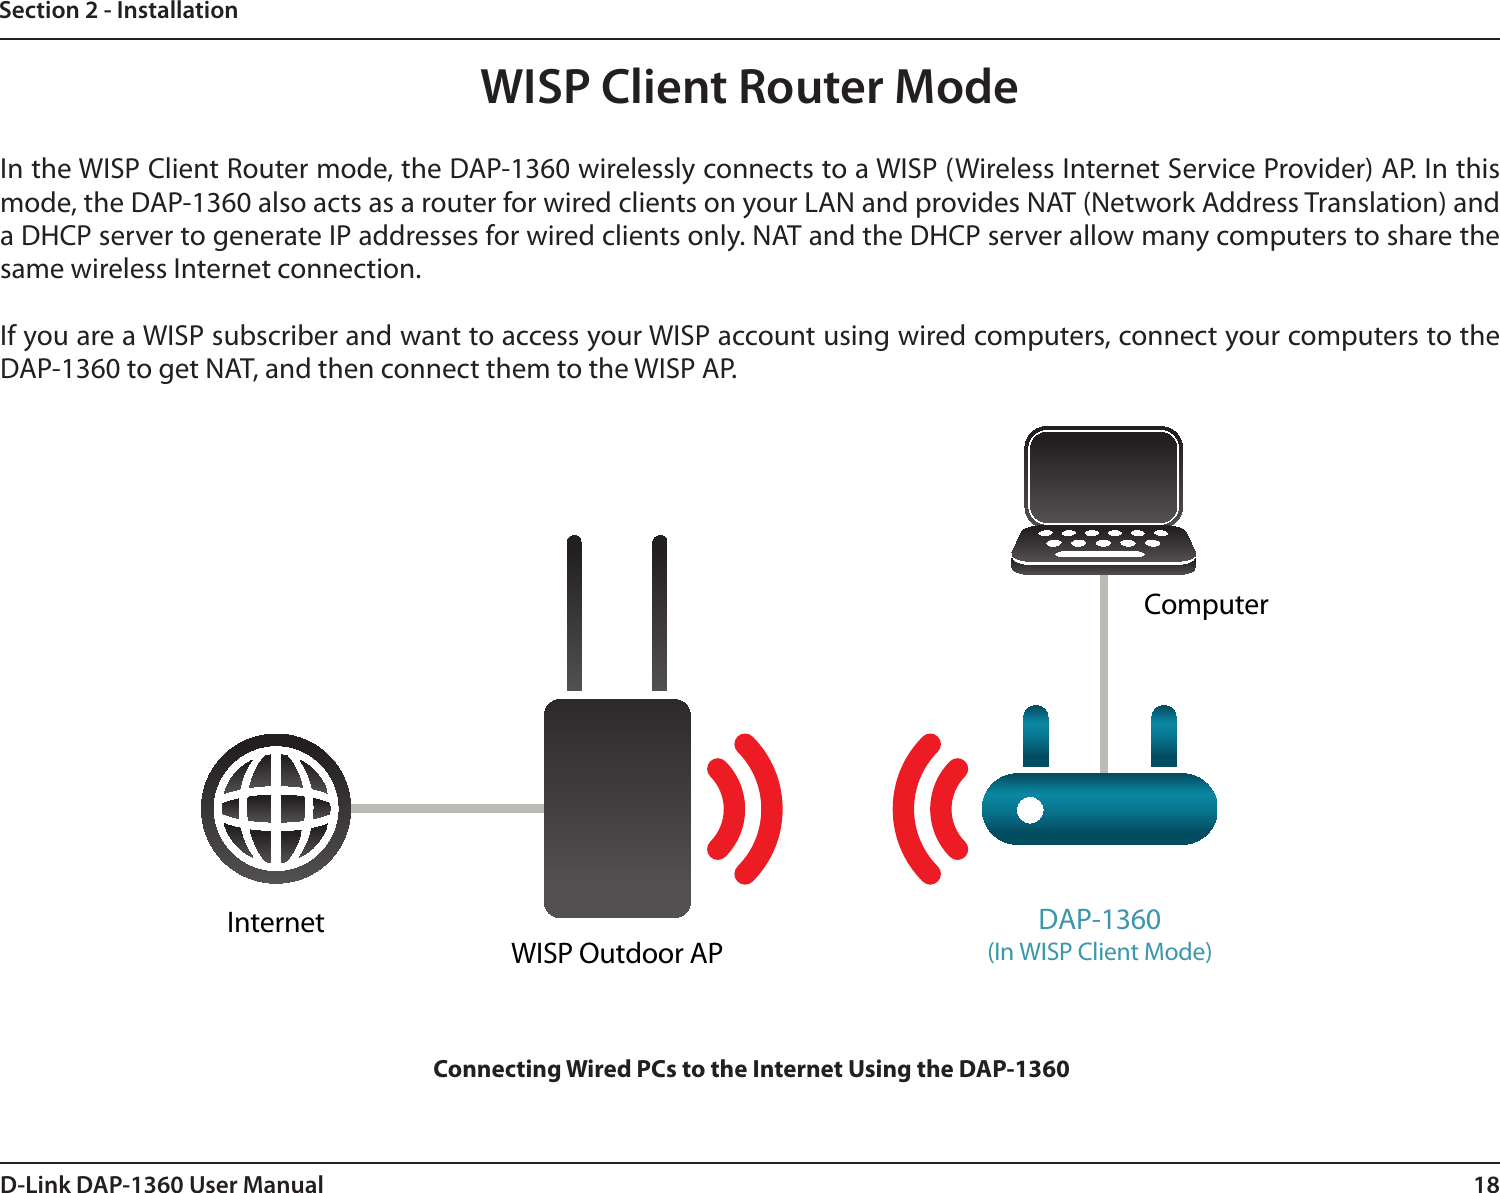 18D-Link DAP-1360 User ManualSection 2 - InstallationWISP Client Router ModeIn the WISP Client Router mode, the DAP-1360 wirelessly connects to a WISP (Wireless Internet Service Provider) AP. In this mode, the DAP-1360 also acts as a router for wired clients on your LAN and provides NAT (Network Address Translation) and a DHCP server to generate IP addresses for wired clients only. NAT and the DHCP server allow many computers to share the same wireless Internet connection.If you are a WISP subscriber and want to access your WISP account using wired computers, connect your computers to the DAP-1360 to get NAT, and then connect them to the WISP AP.InternetComputerDAP-1360(In WISP Client Mode)WISP Outdoor APConnecting Wired PCs to the Internet Using the DAP-1360